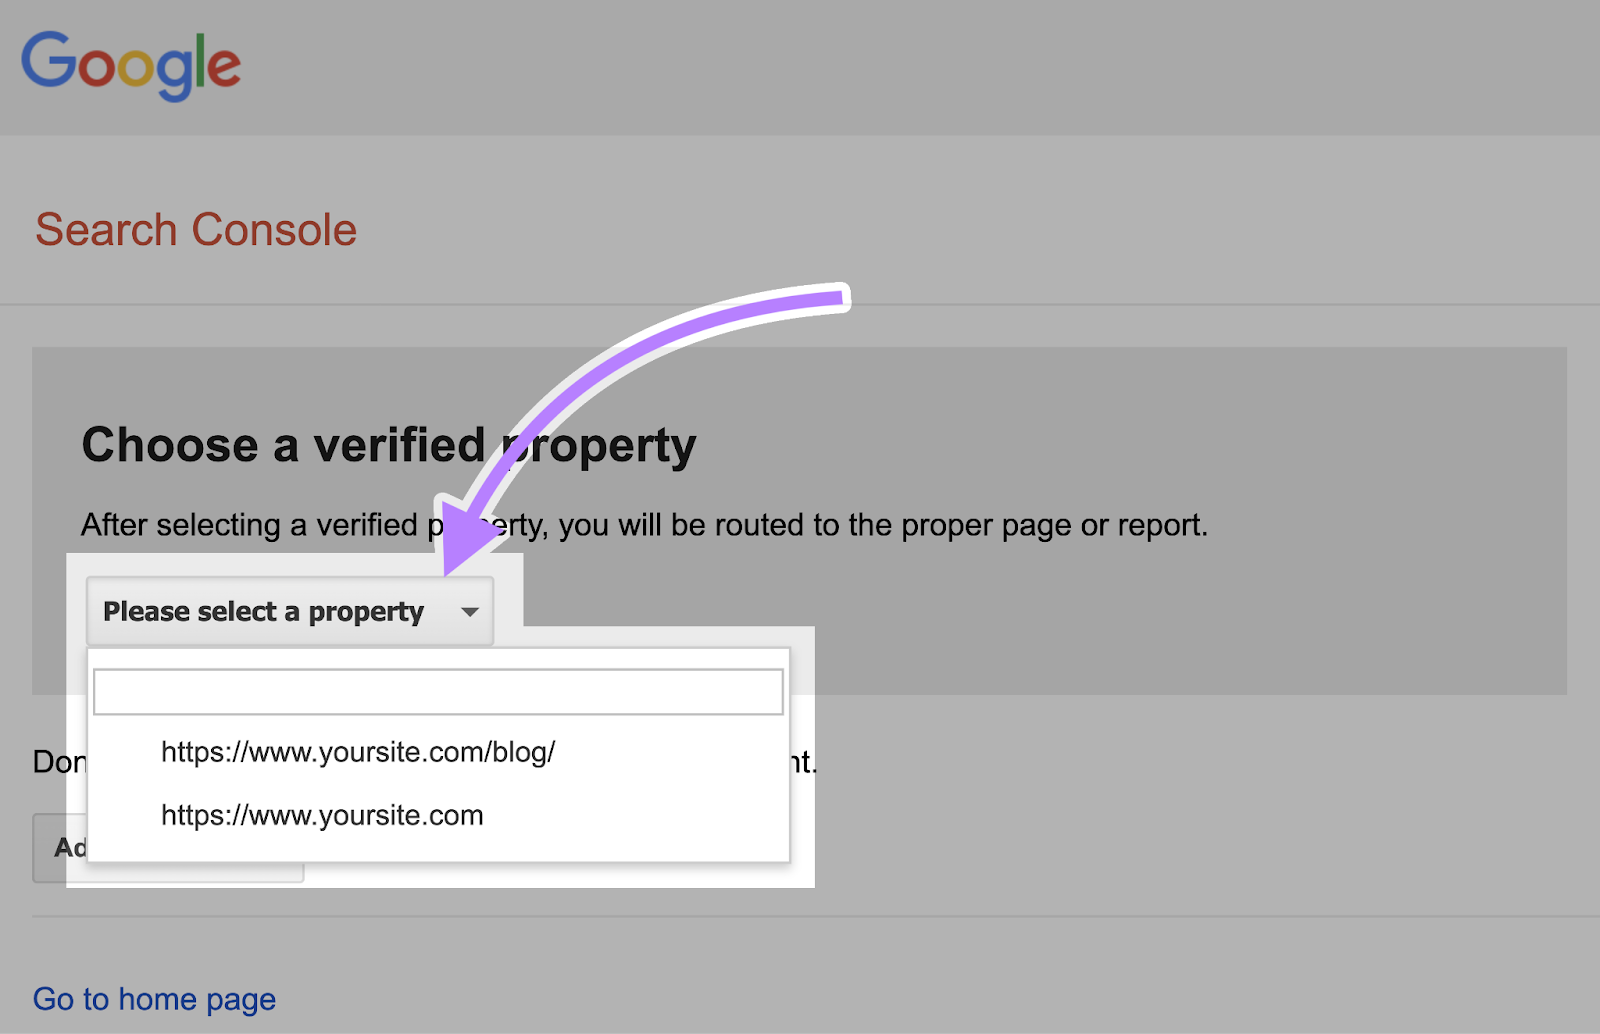 Select property from the drop-down list